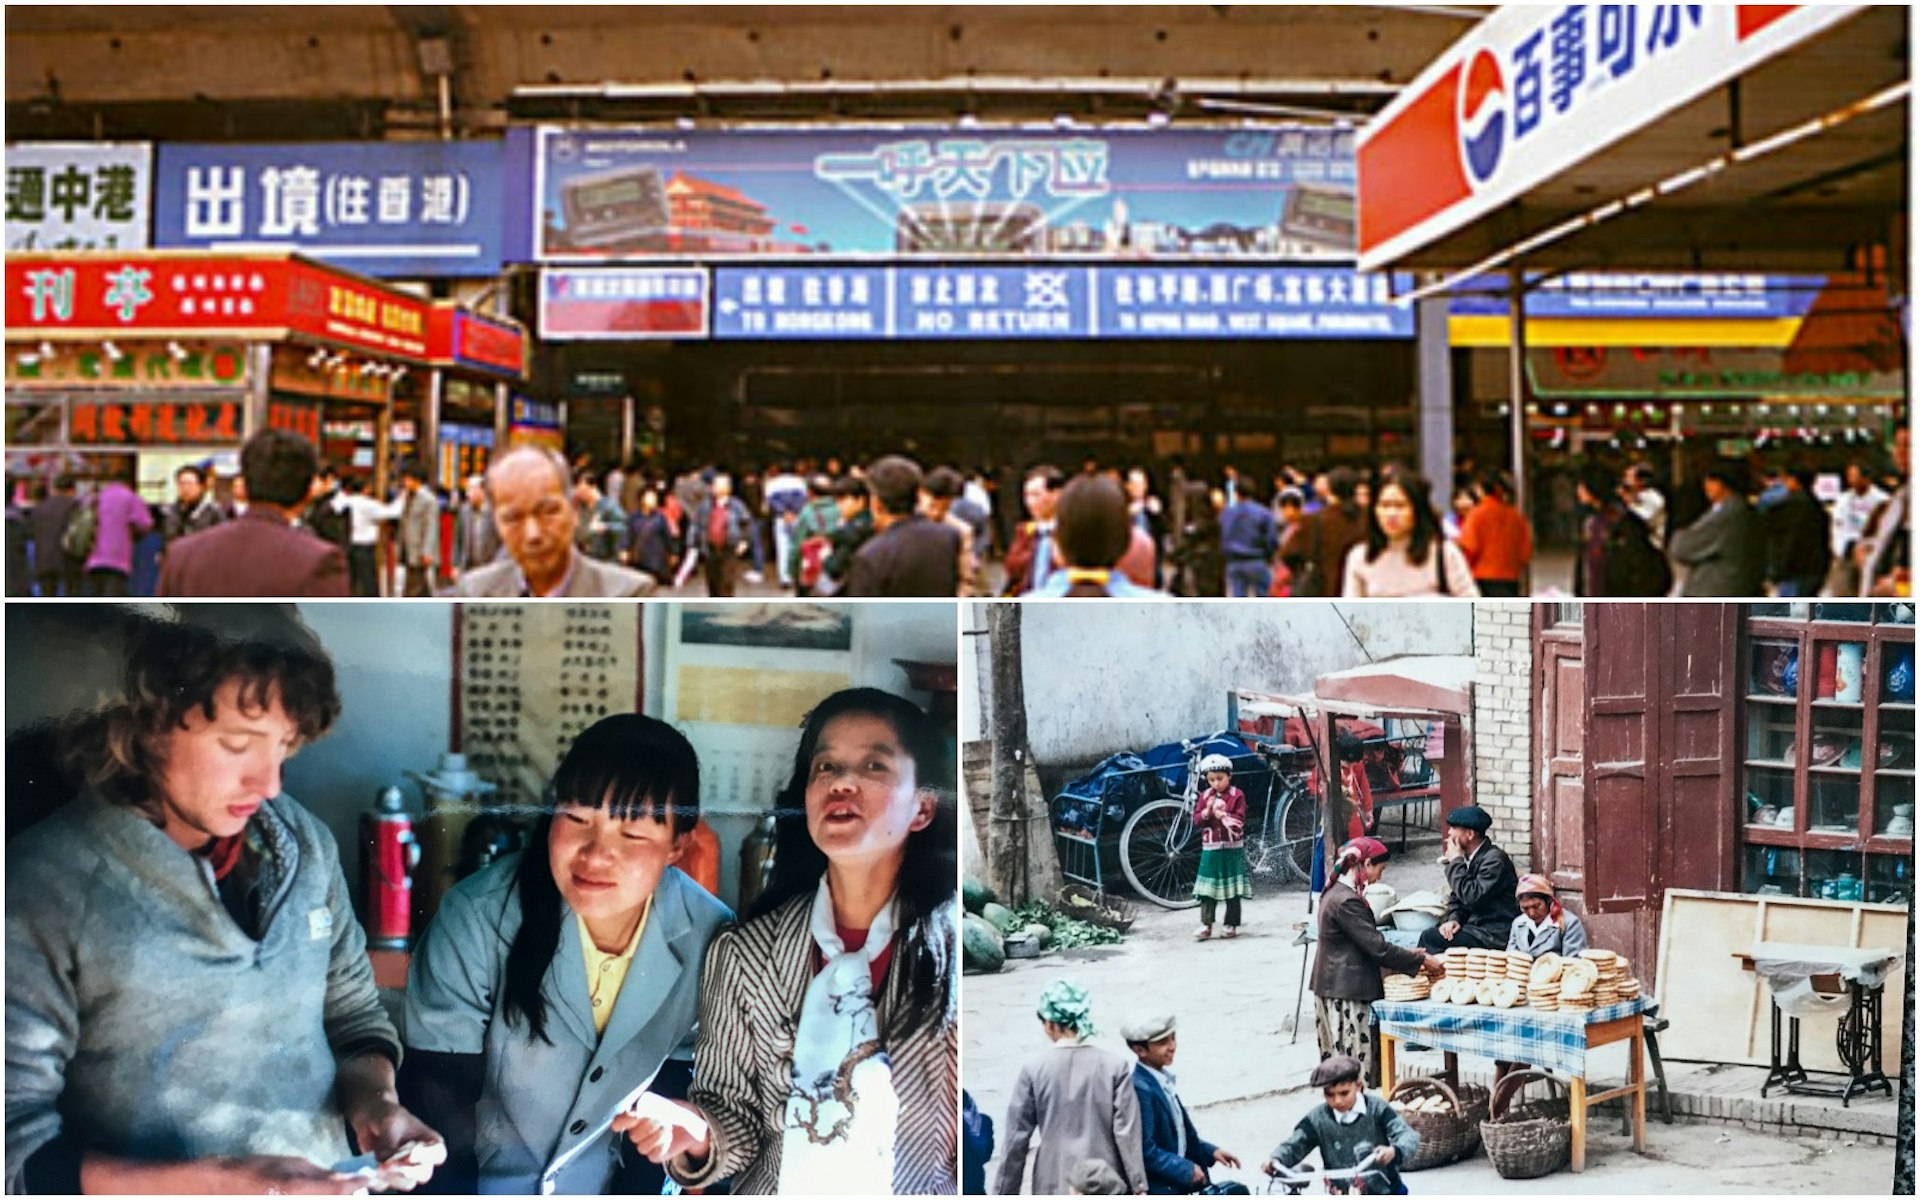 (Clockwise) Chinese Immigration checkpoint at Shenzhen, 1988; Uighur flat bread stall, Kashgar, Xinjiang, 1988; The author settling the bill at the legendary Pete’s cafe, Lijiang 1989